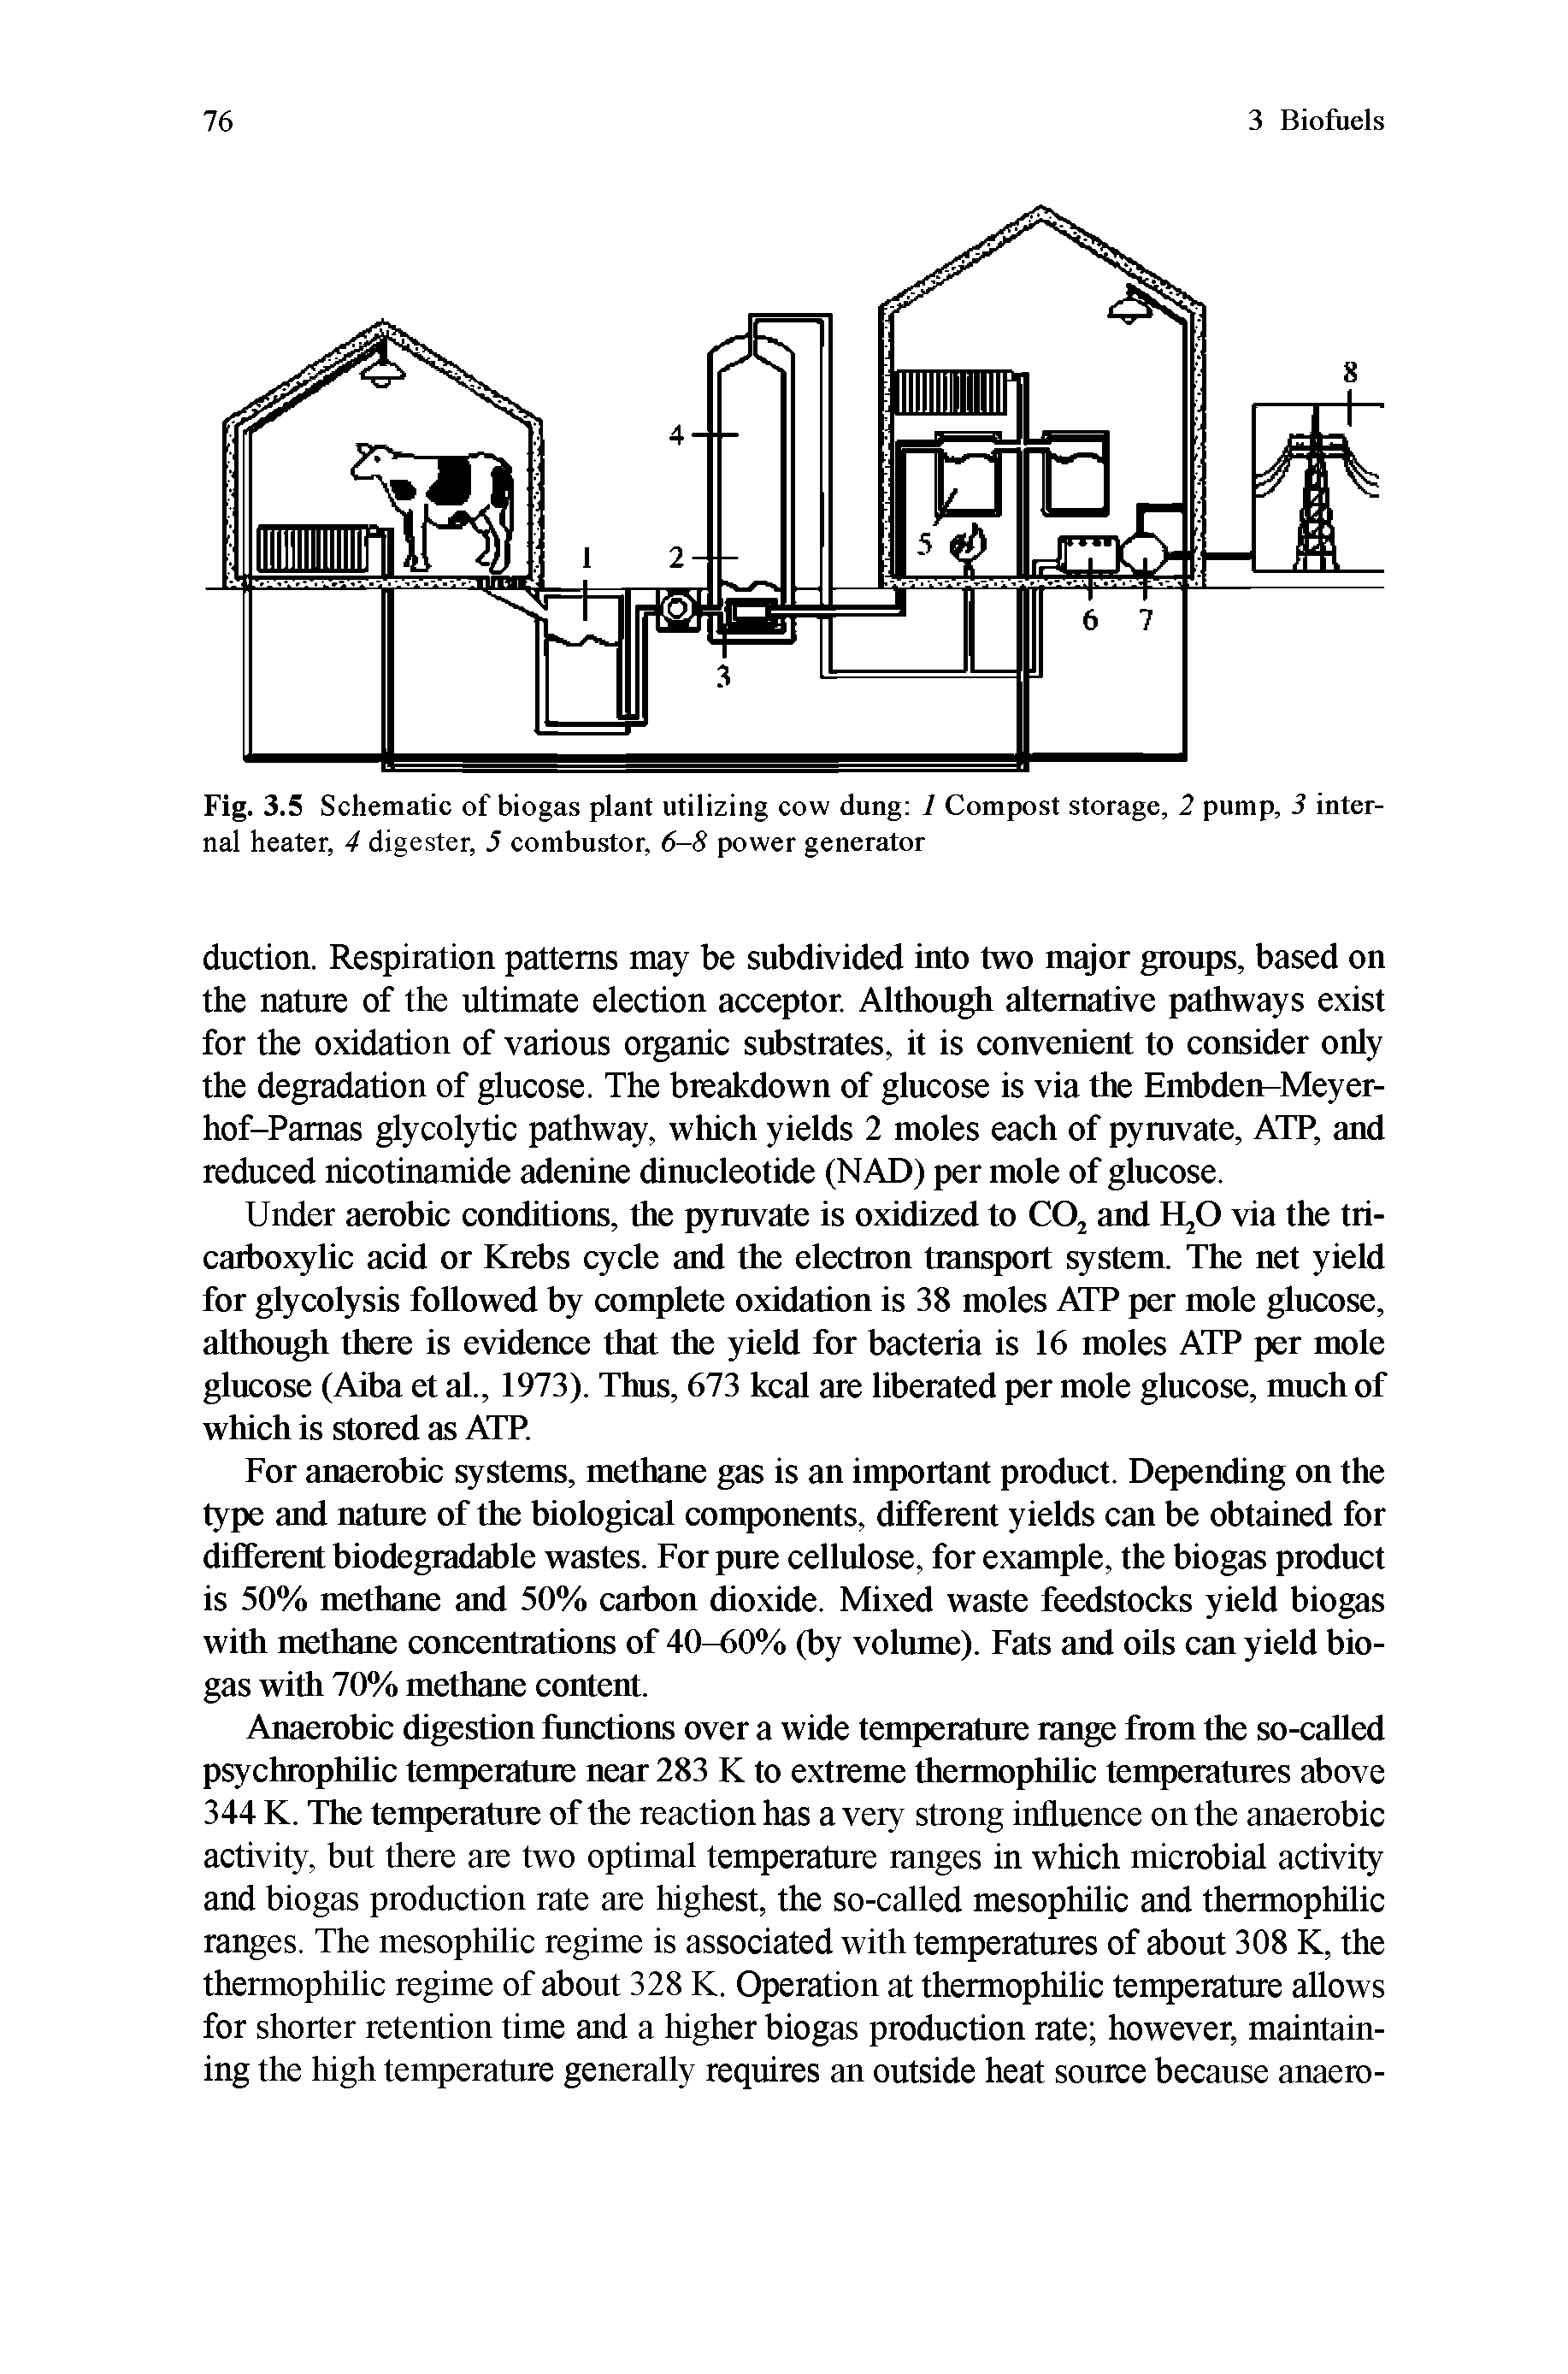 Fig. 3.5 Schematic of biogas plant utilizing cow dung 1 Compost storage, 2 pump, 3 internal heater, 4 digester, 5 combustor, 6-8 power generator...